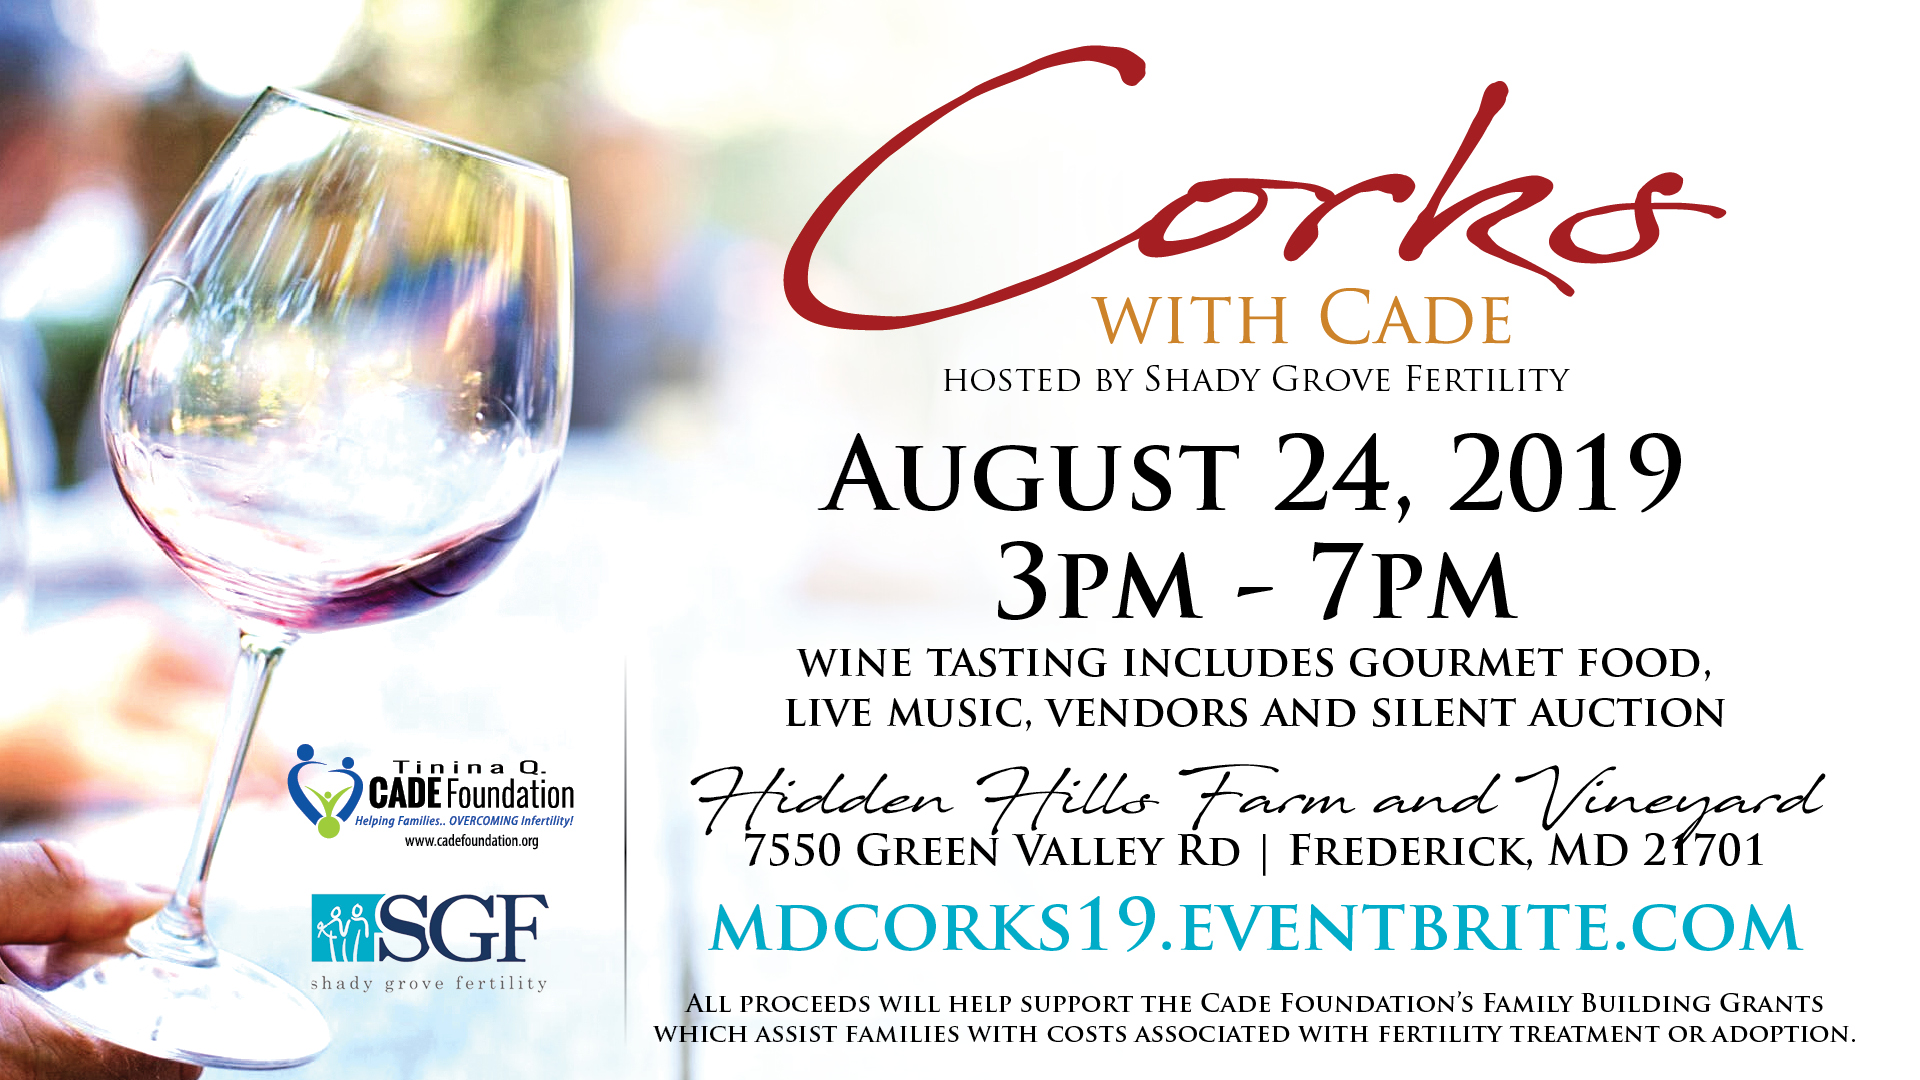 Corks with Cade 2019 Flyer